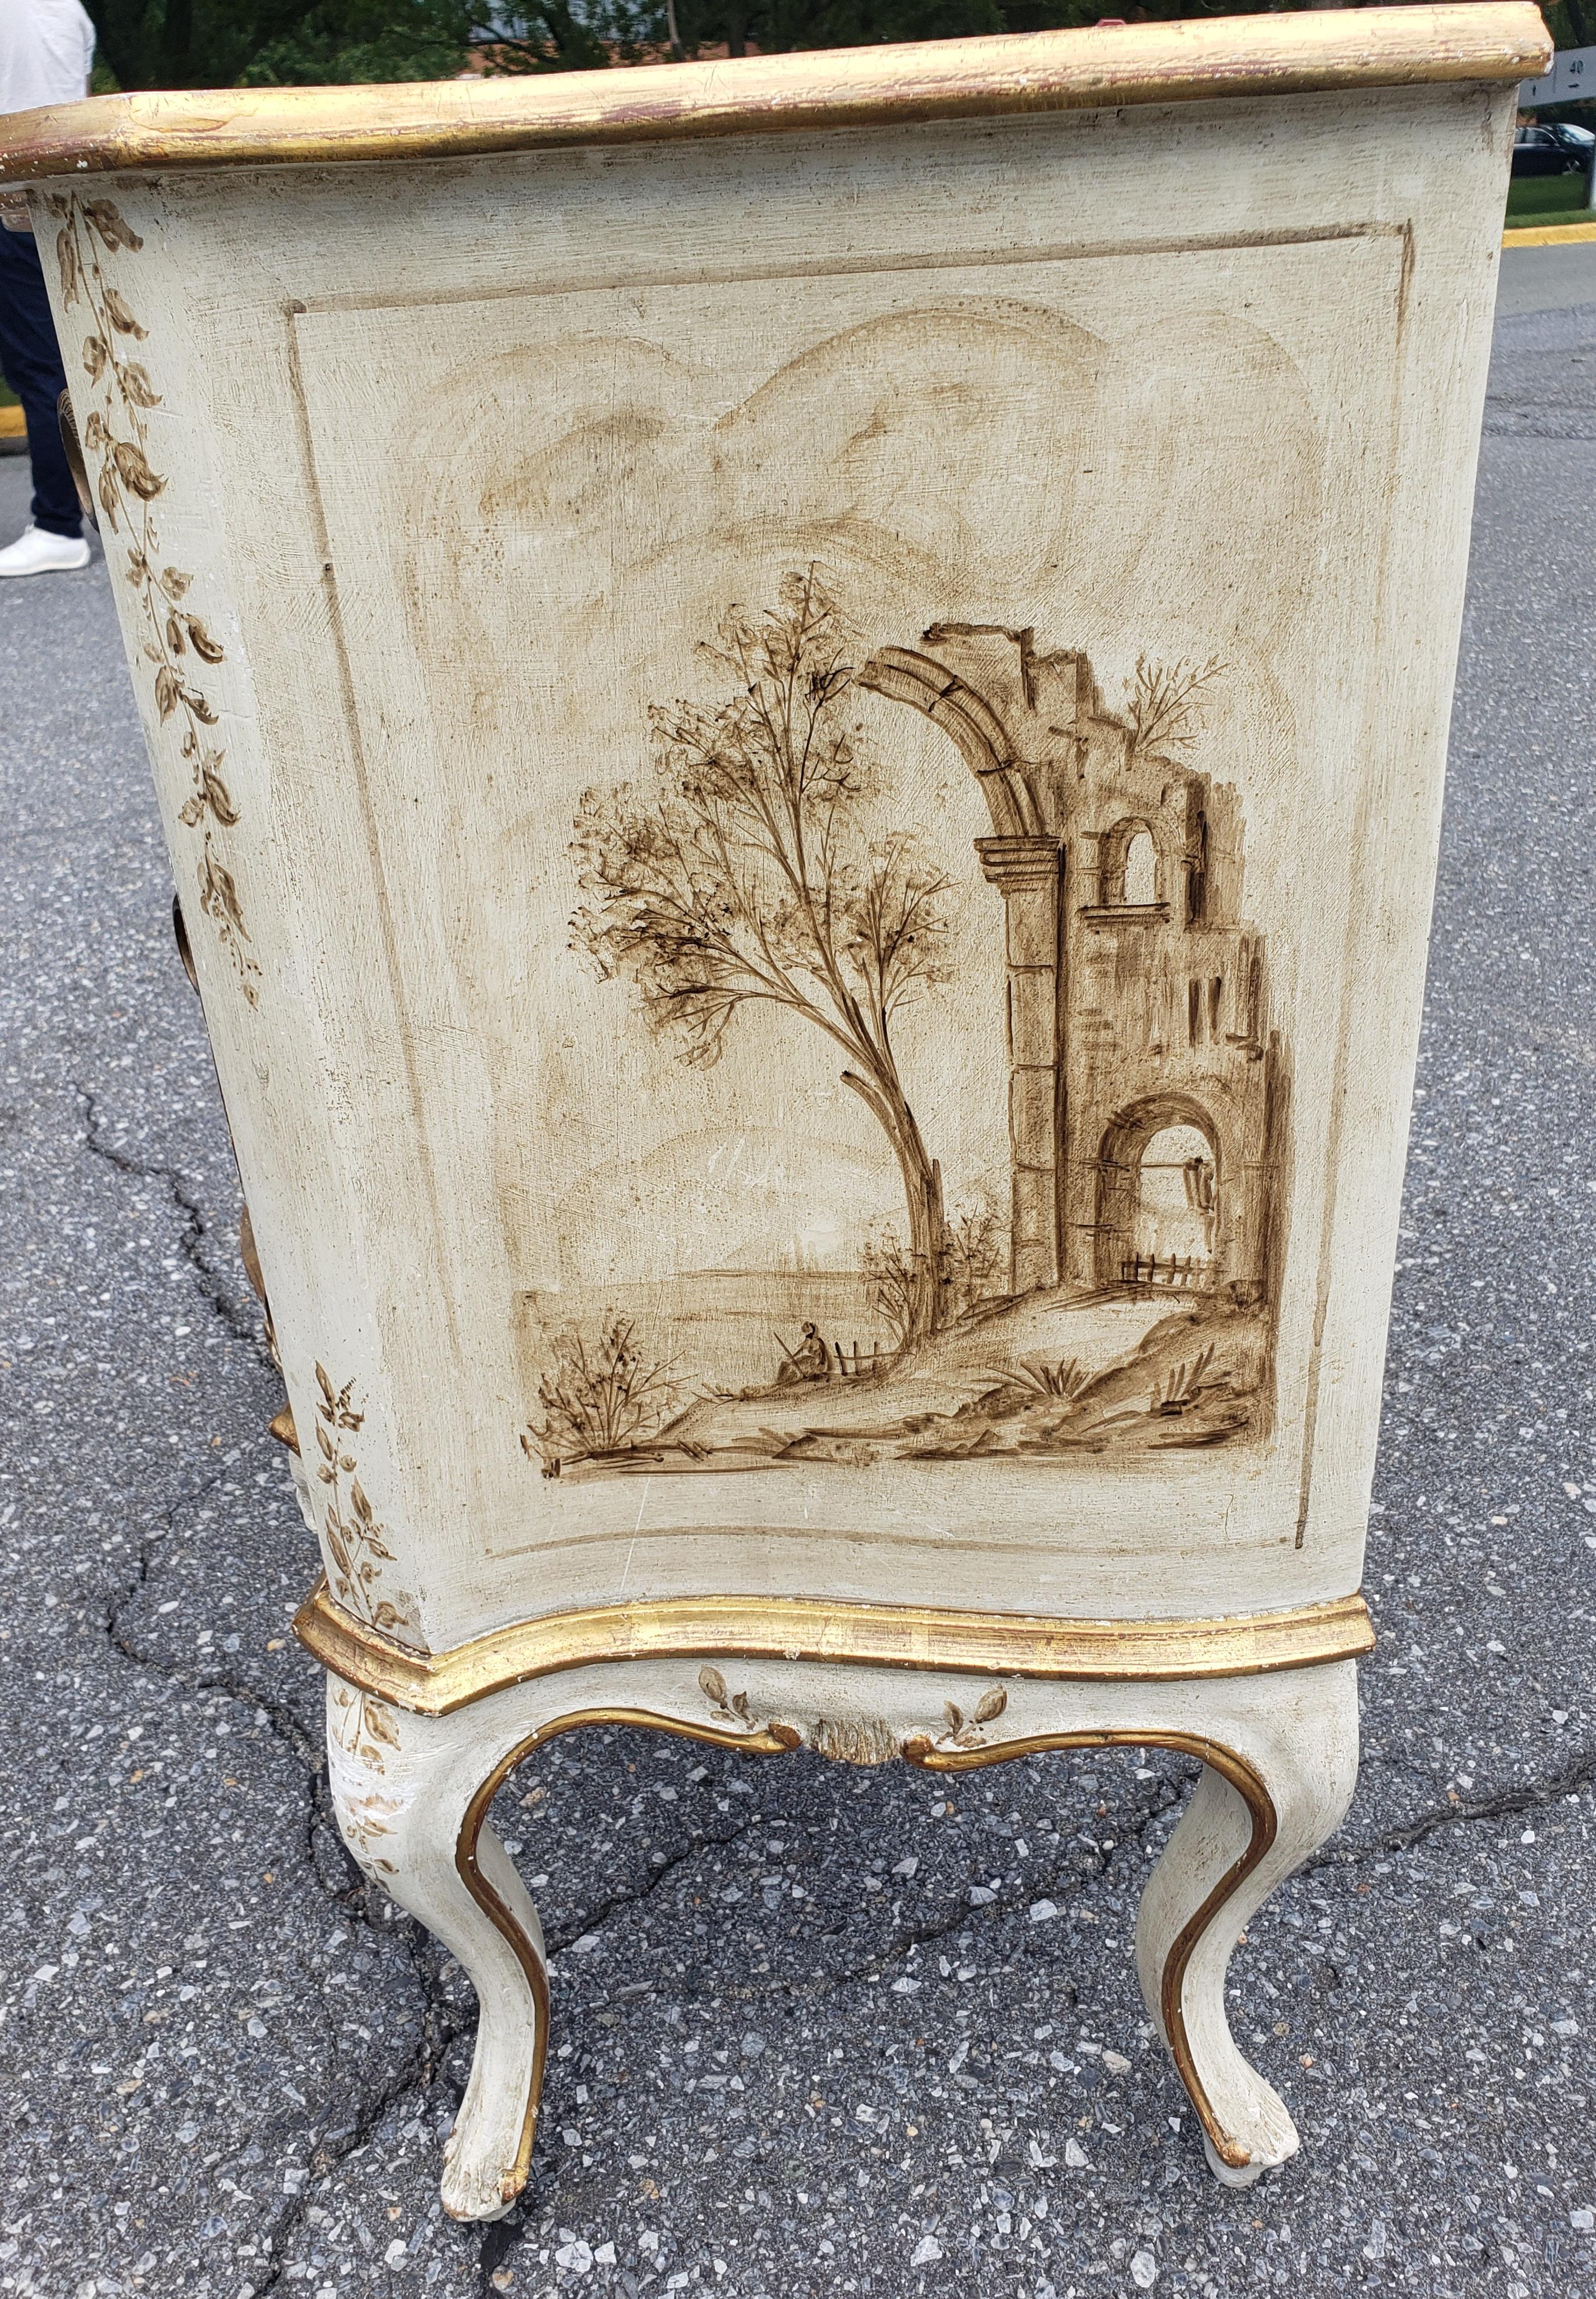 Italian Early 20th C. Venetian Hand-Painted and Decorated Partial Gilt Commode w/ Glass For Sale